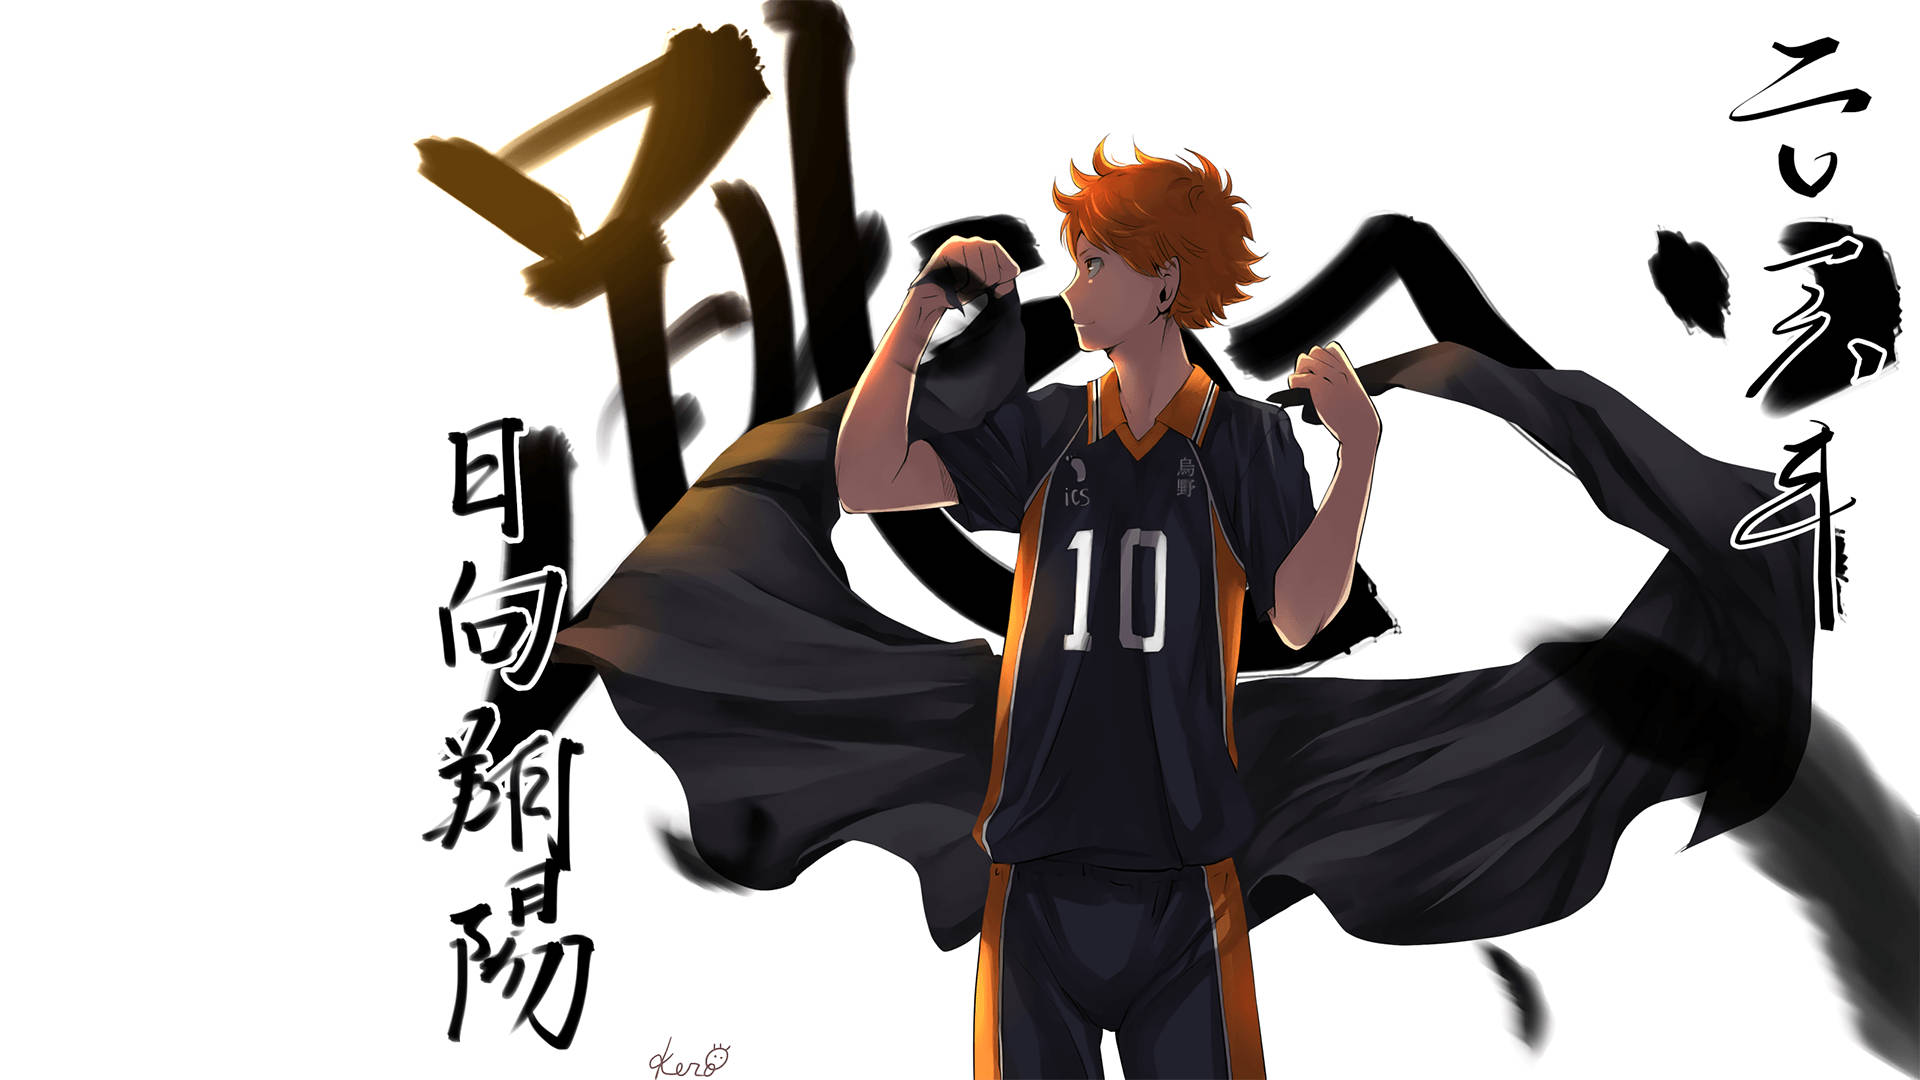 Hinata Shouyou unleashes an impressive attack at the game of volleyball. Wallpaper